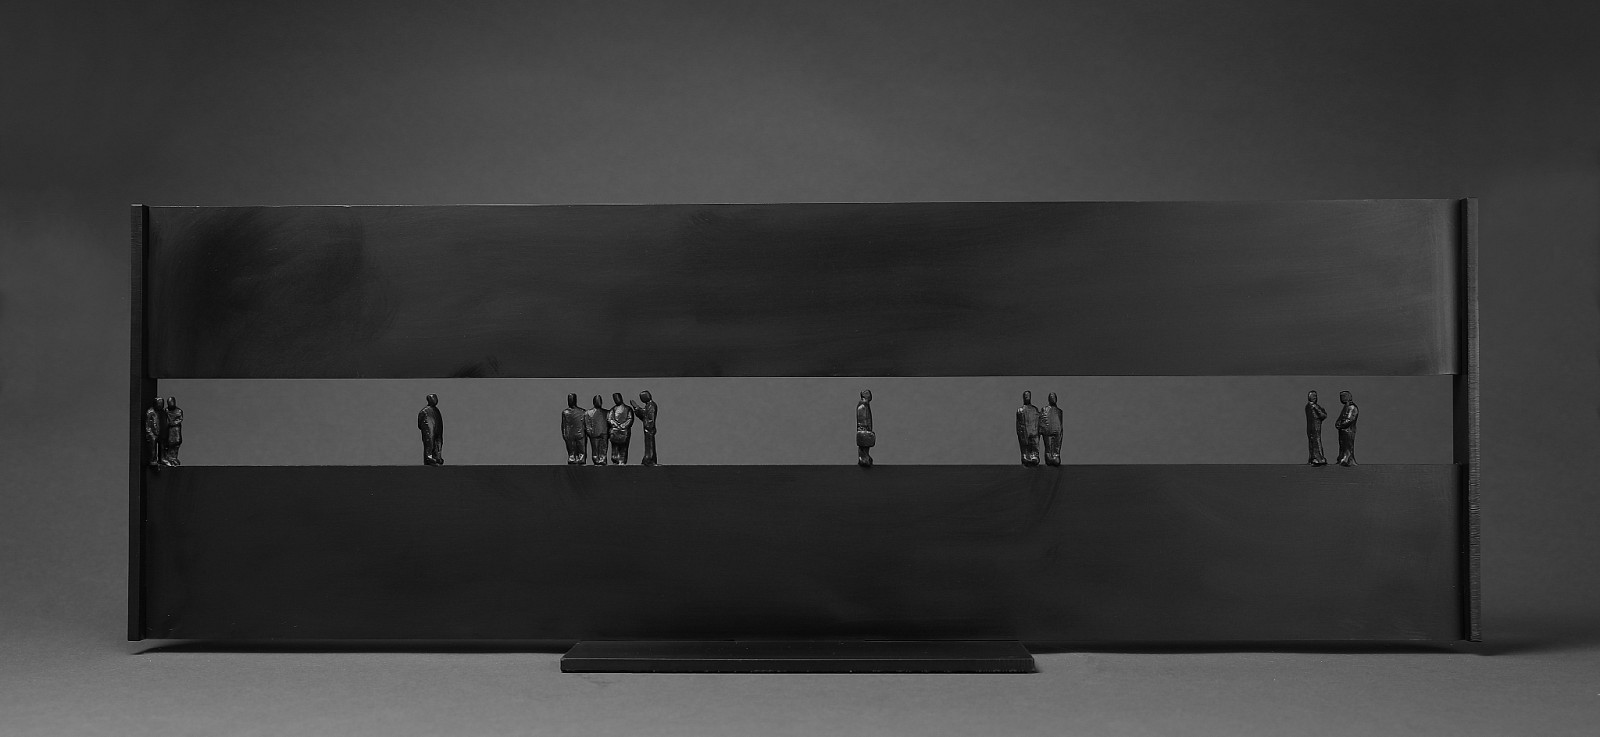 Jim Rennert, In Transit II, Edition of 9, 2018
bronze and steel, 10 x 30 x 6 in. (25.4 x 76.2 x 15.2 cm)